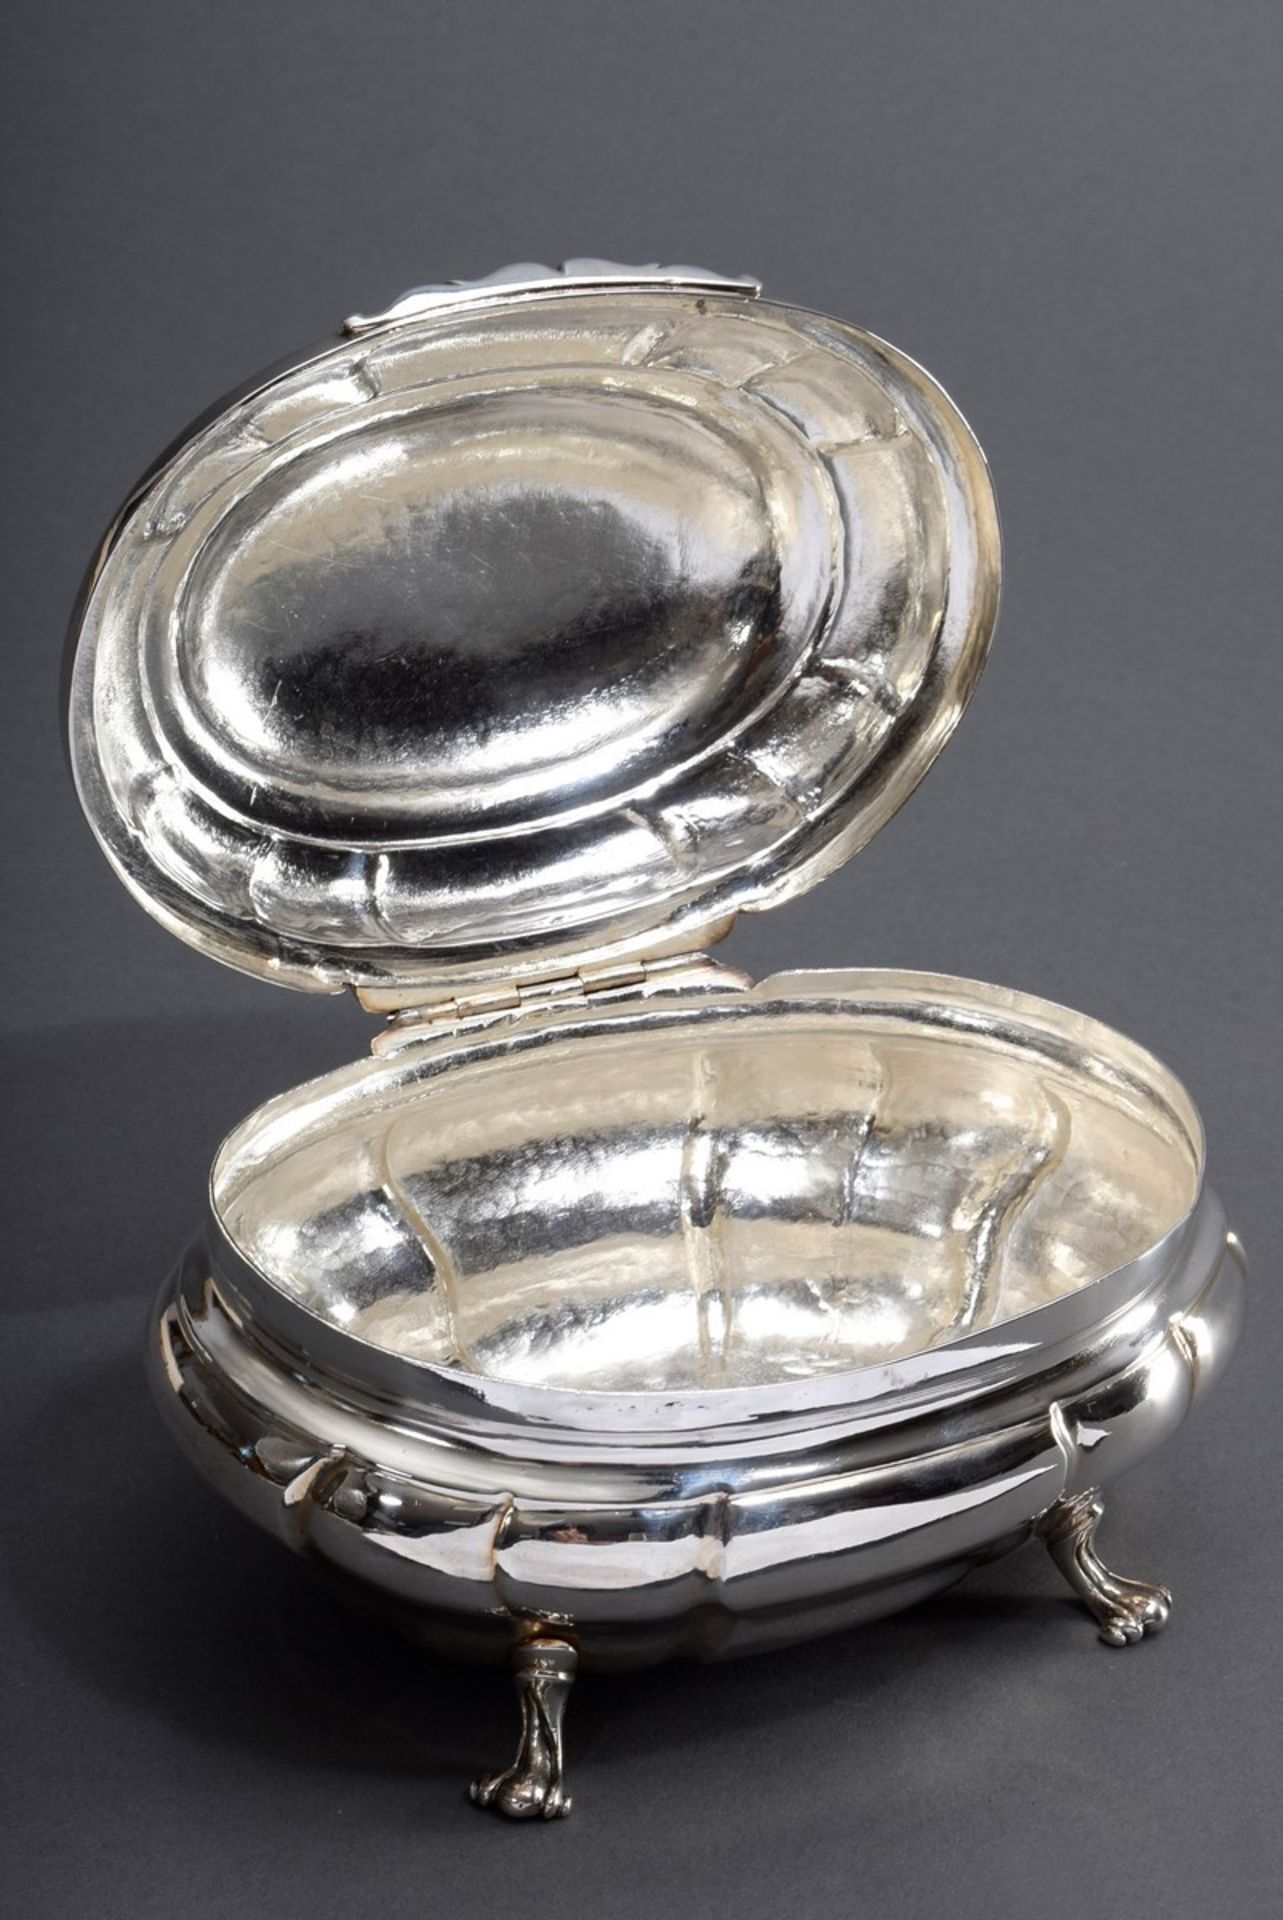 Oval baroque sugar bowl with sparsely decorated body on feet, MM / inspection indistinct, silver, 3 - Image 3 of 5